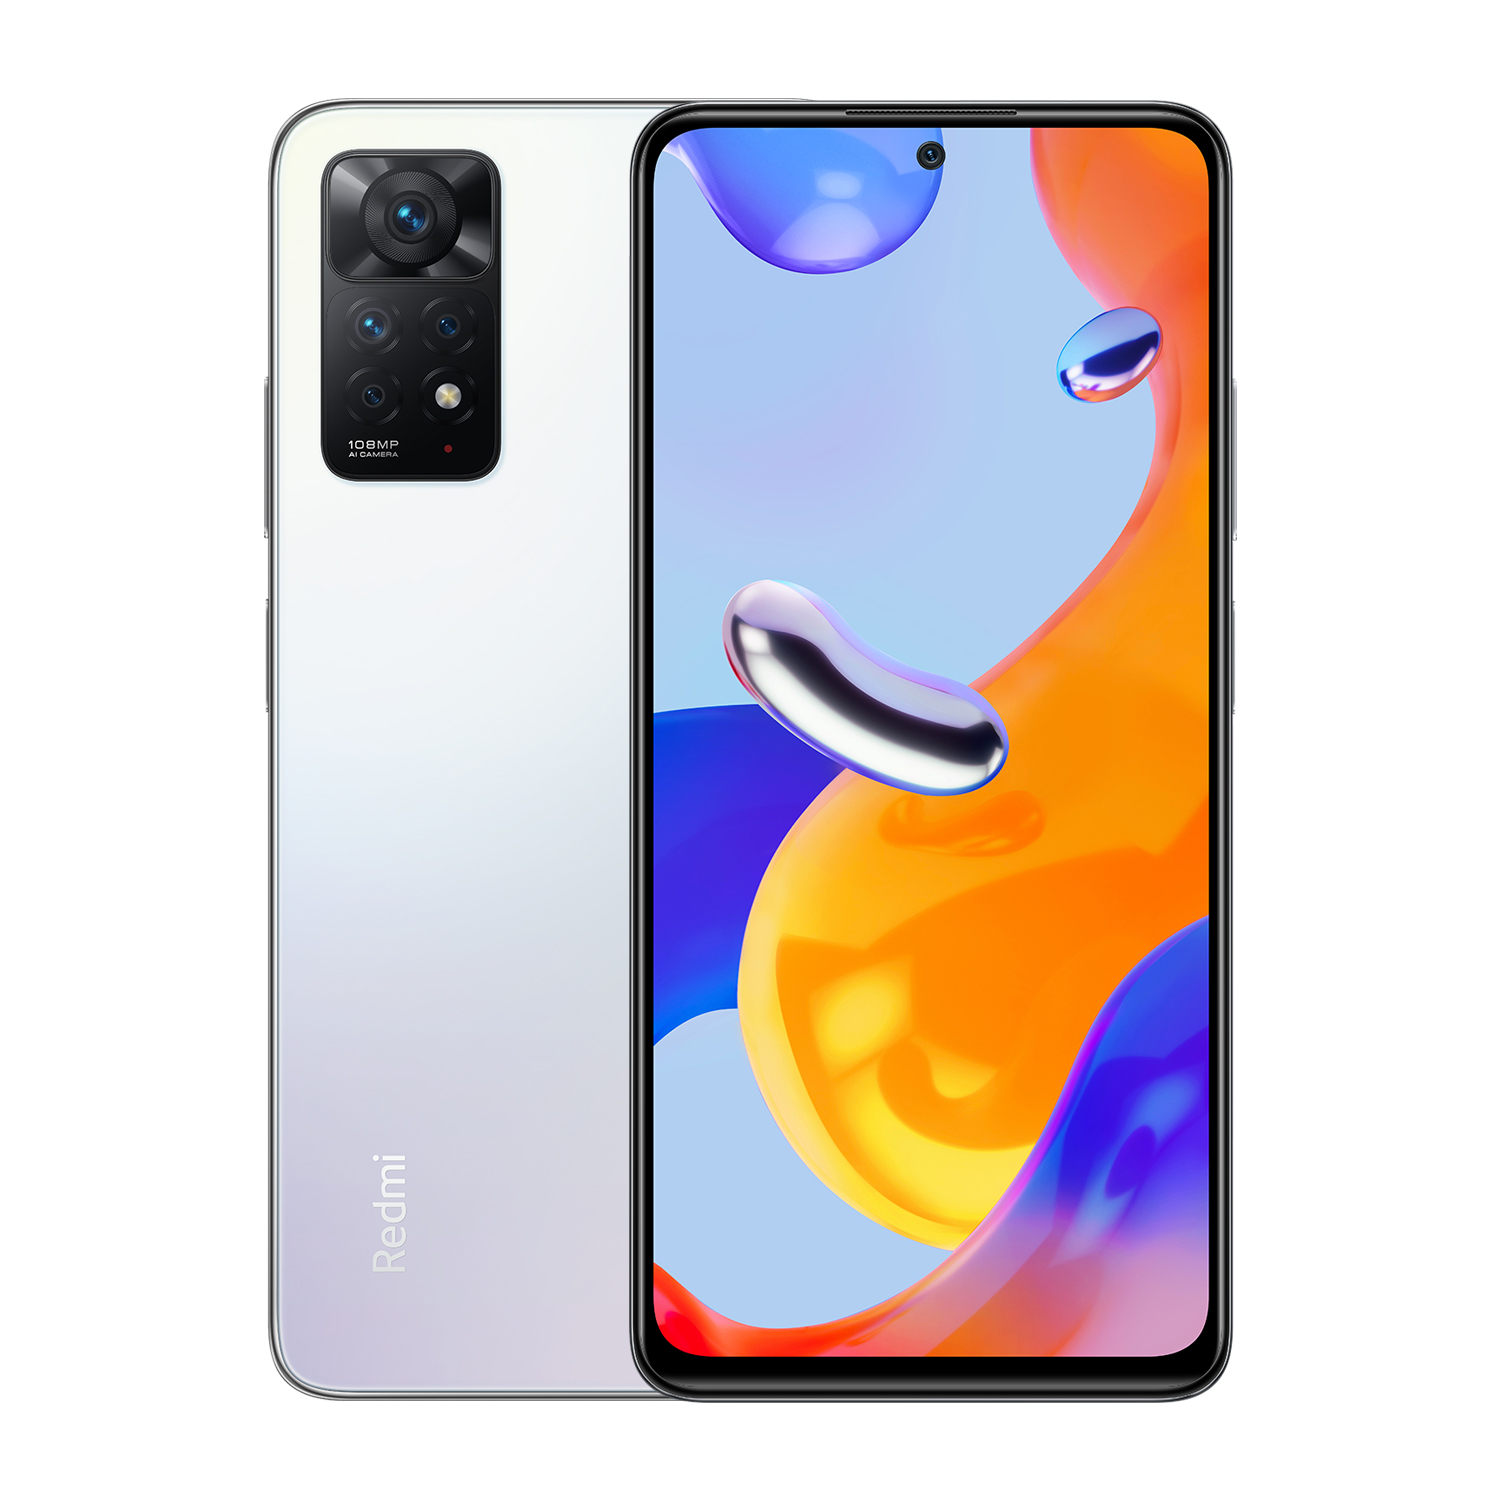 Find Xiaomi Redmi Note 11 Pro 4G Global Version 108MP Quad Camera 67W Turbo Charging 6 67 inch 120Hz AMOLED NFC 64GB 128GB Helio G96 Octa Core 4G Smartphone for Sale on Gipsybee.com with cryptocurrencies